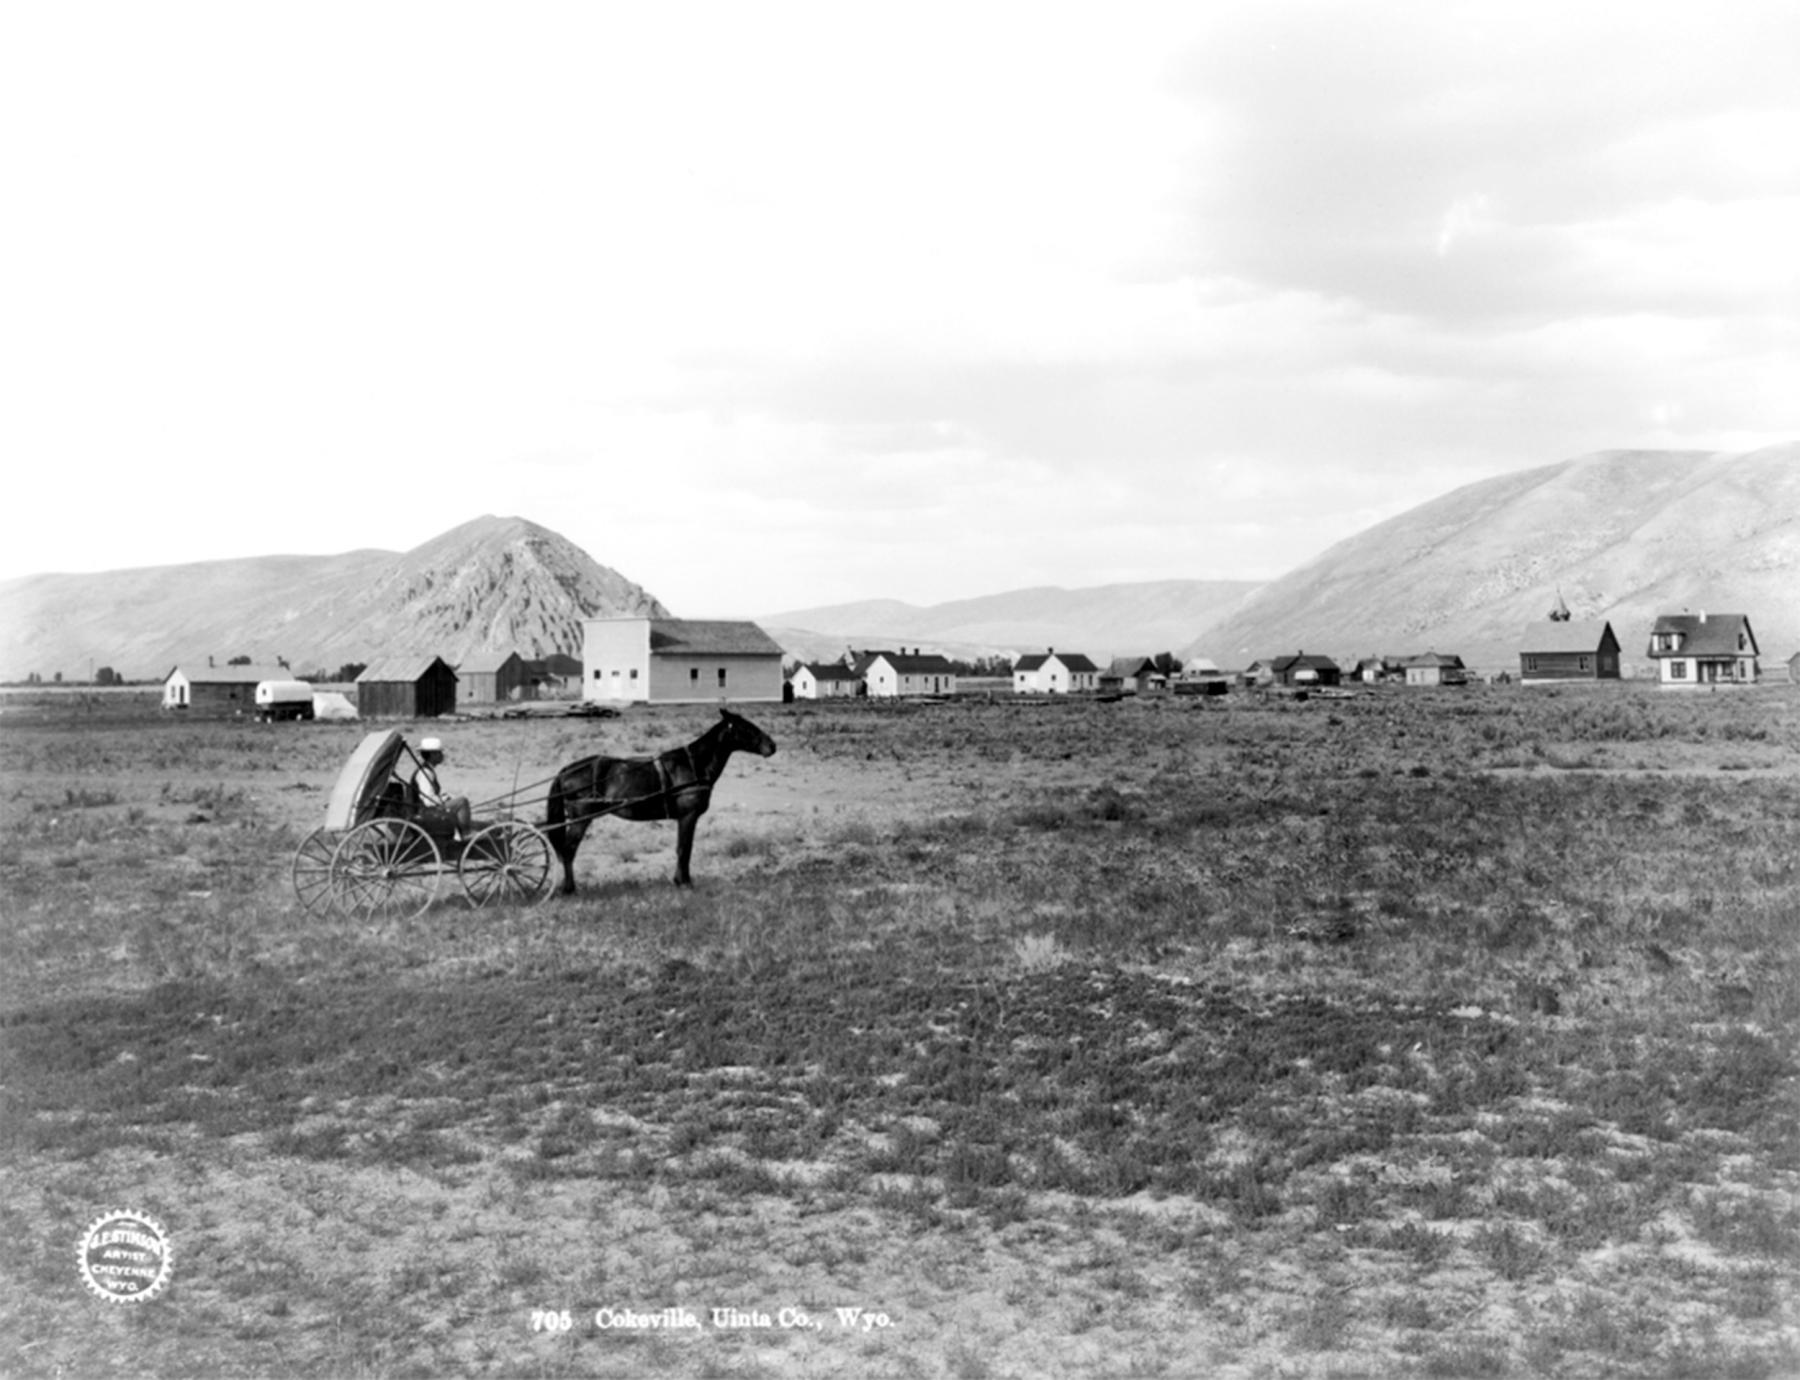 Cokeville in 1903. When Ethel Stoner moved there, there were no paved roads and only a few businesses, including two saloons. J.L. Stimson photo, Wyoming State Archives.